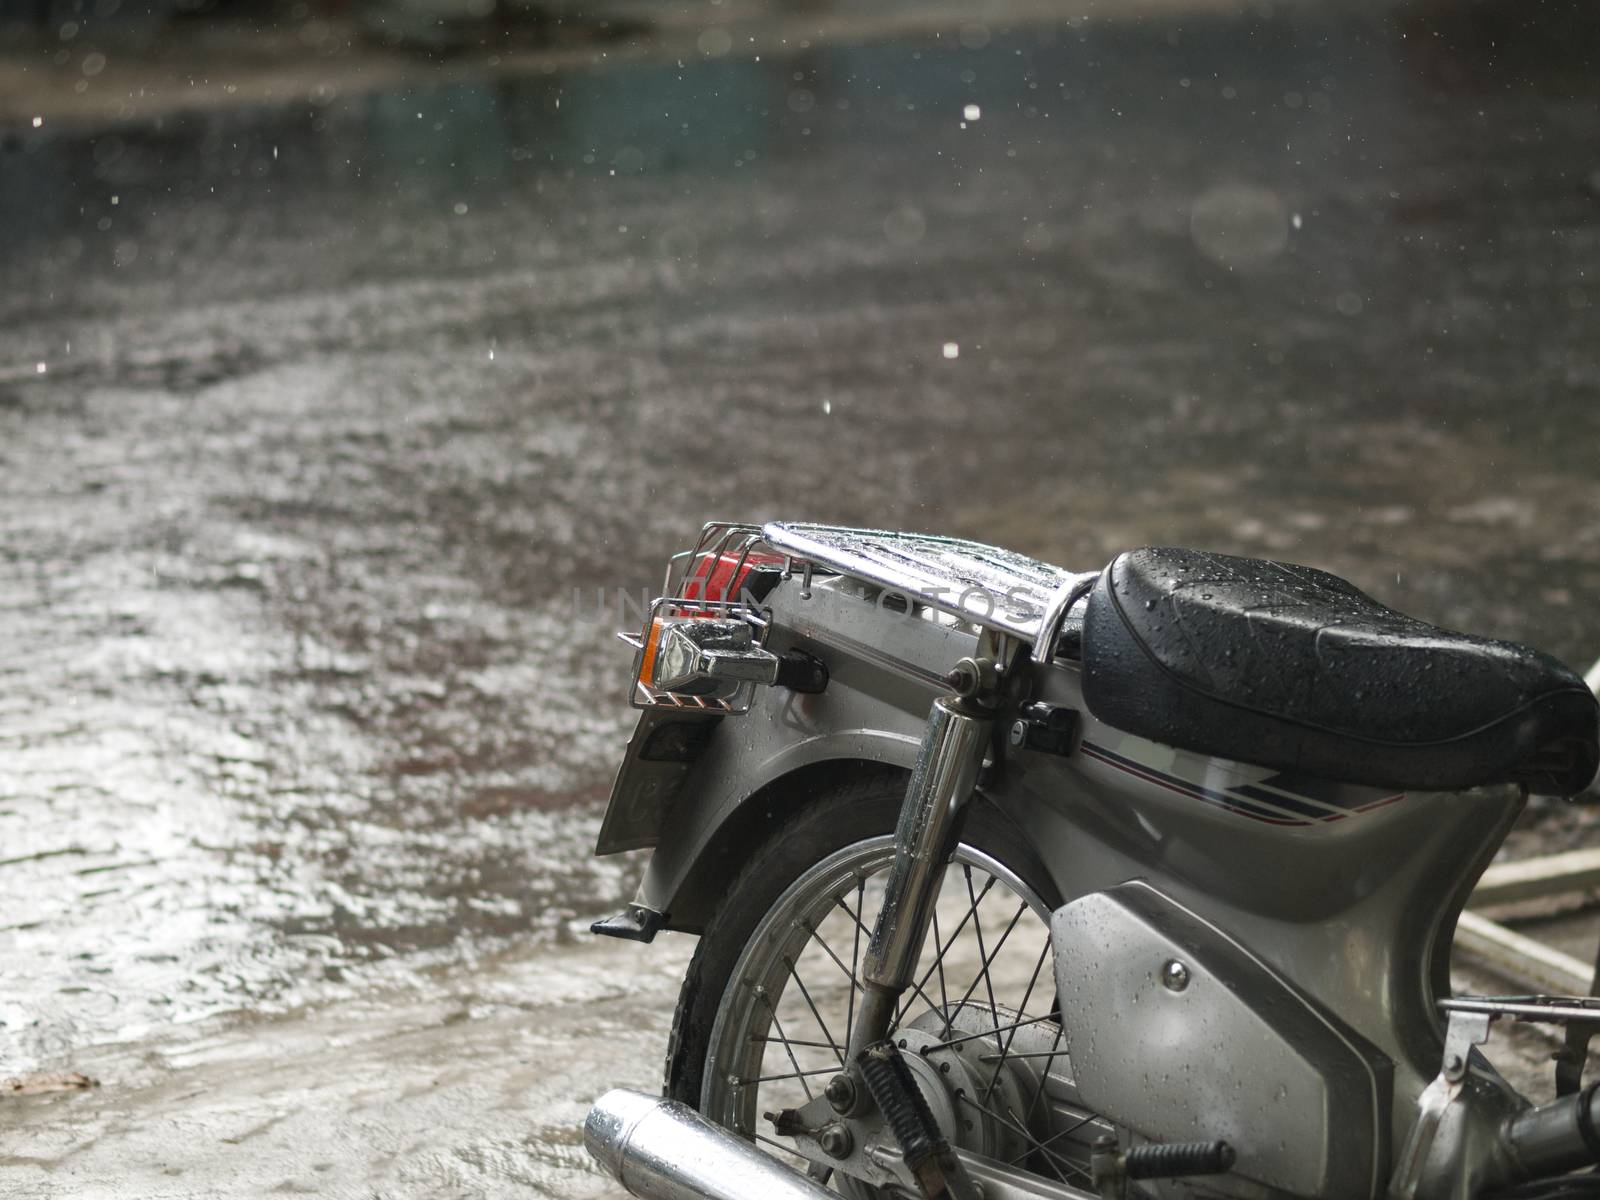 MOTORCYCLE AND CLOSE-UP OF RAINDROPS by PrettyTG